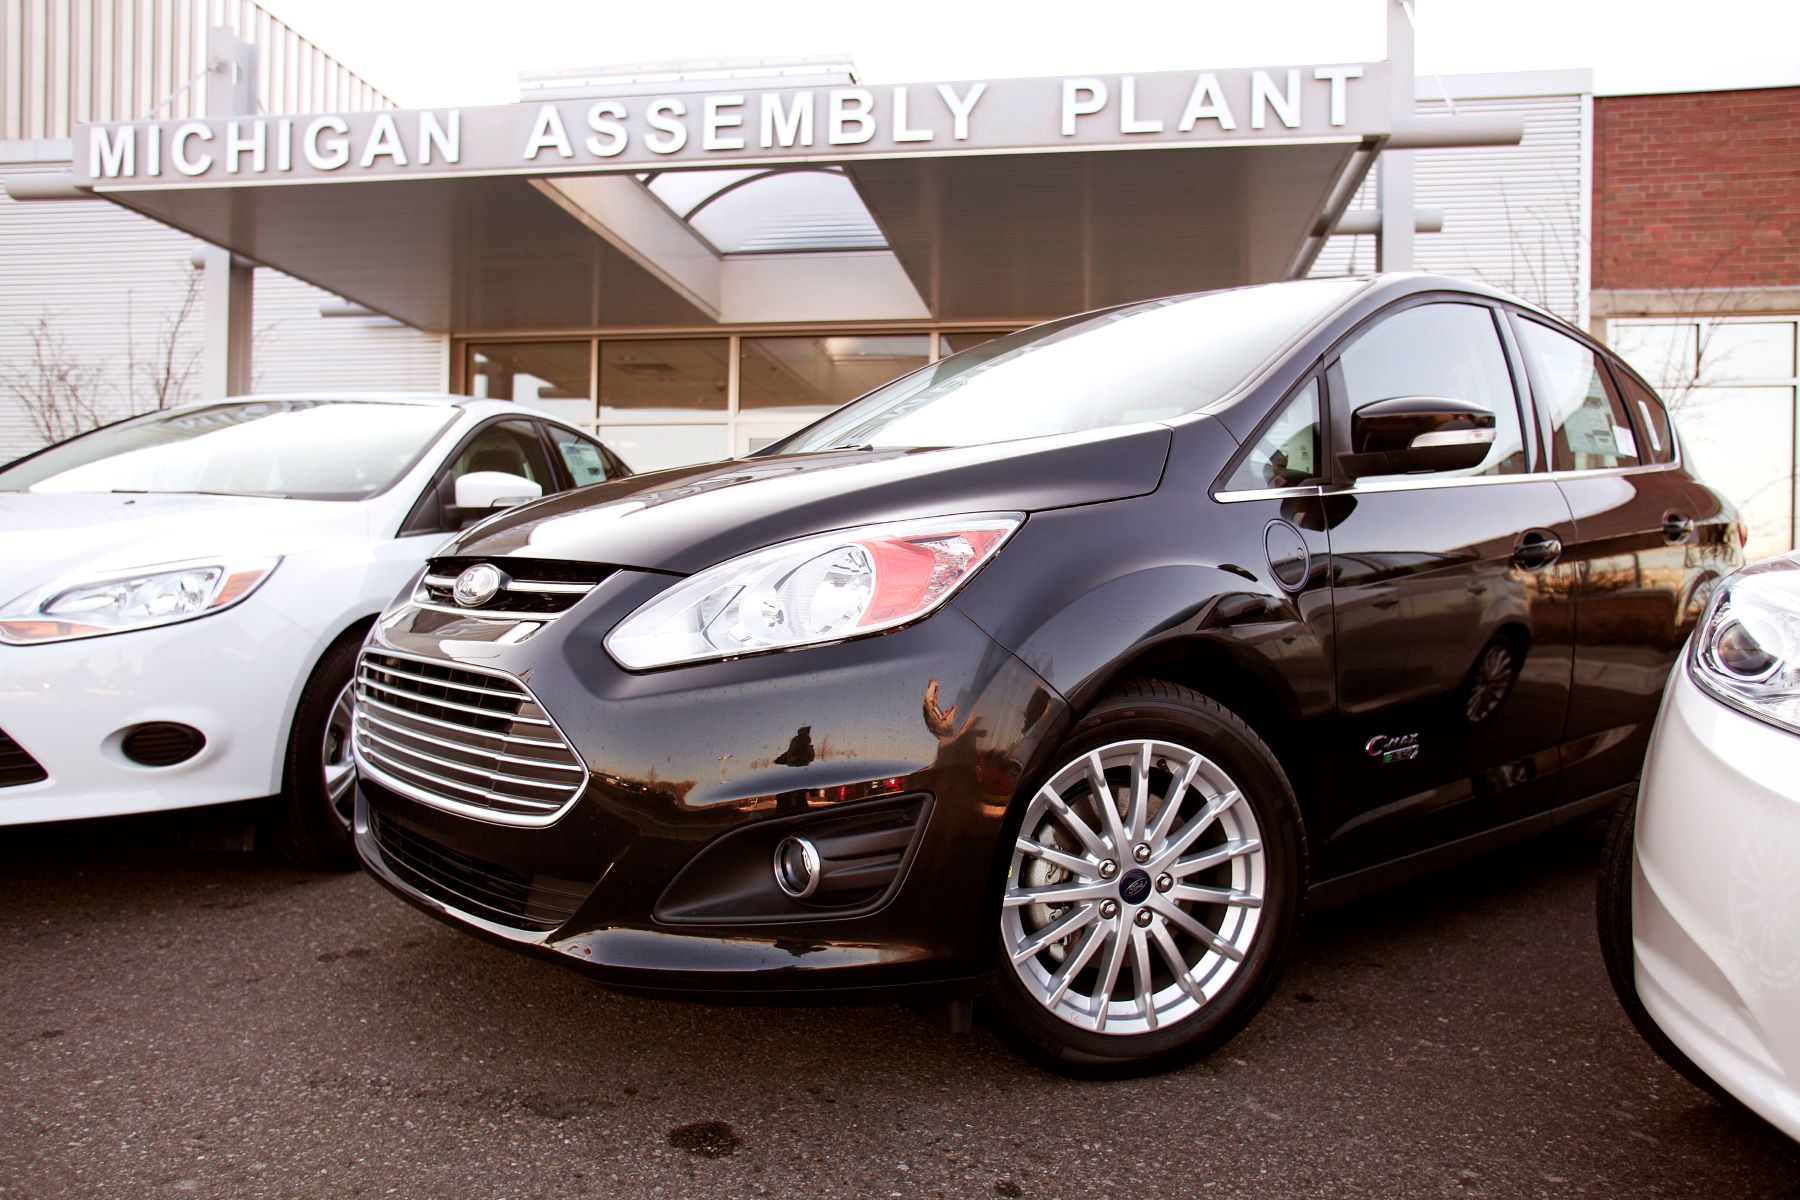 A Ford C-MAX Energi plug-in hybrid model displayed at the Michigan Assembly Plant in Detroit